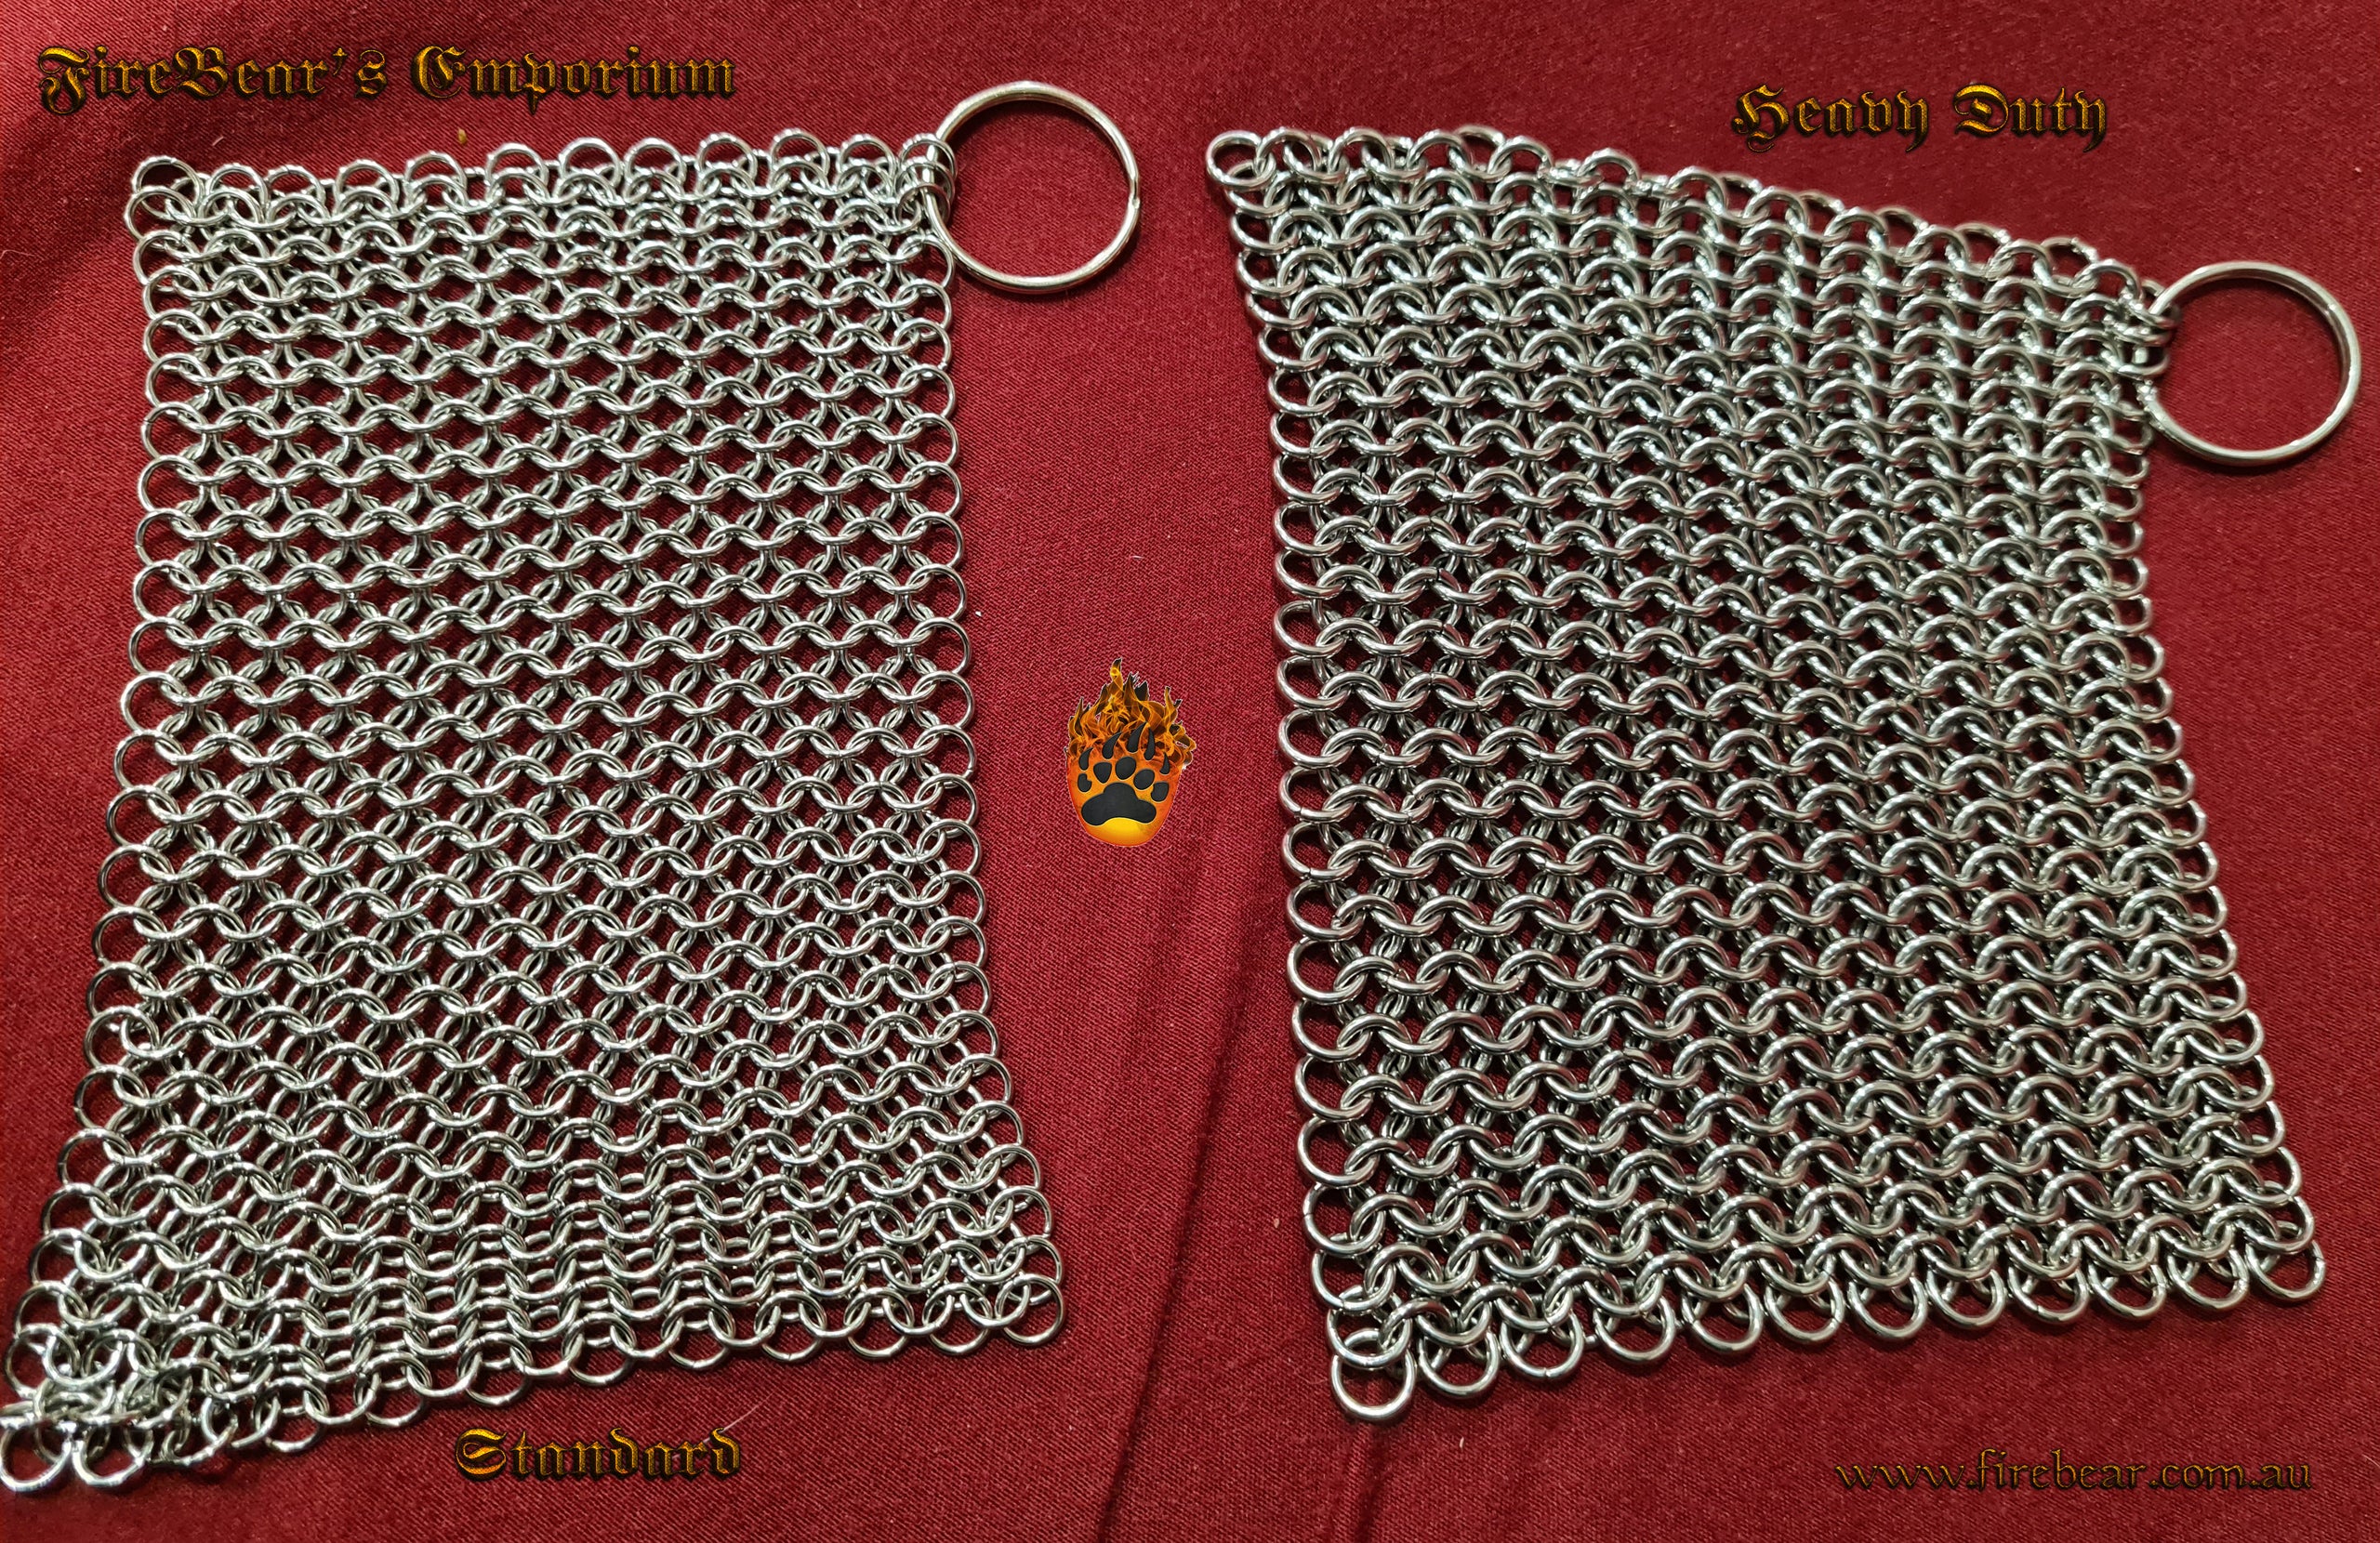 How to Make a Chainmail Pot Scrubber